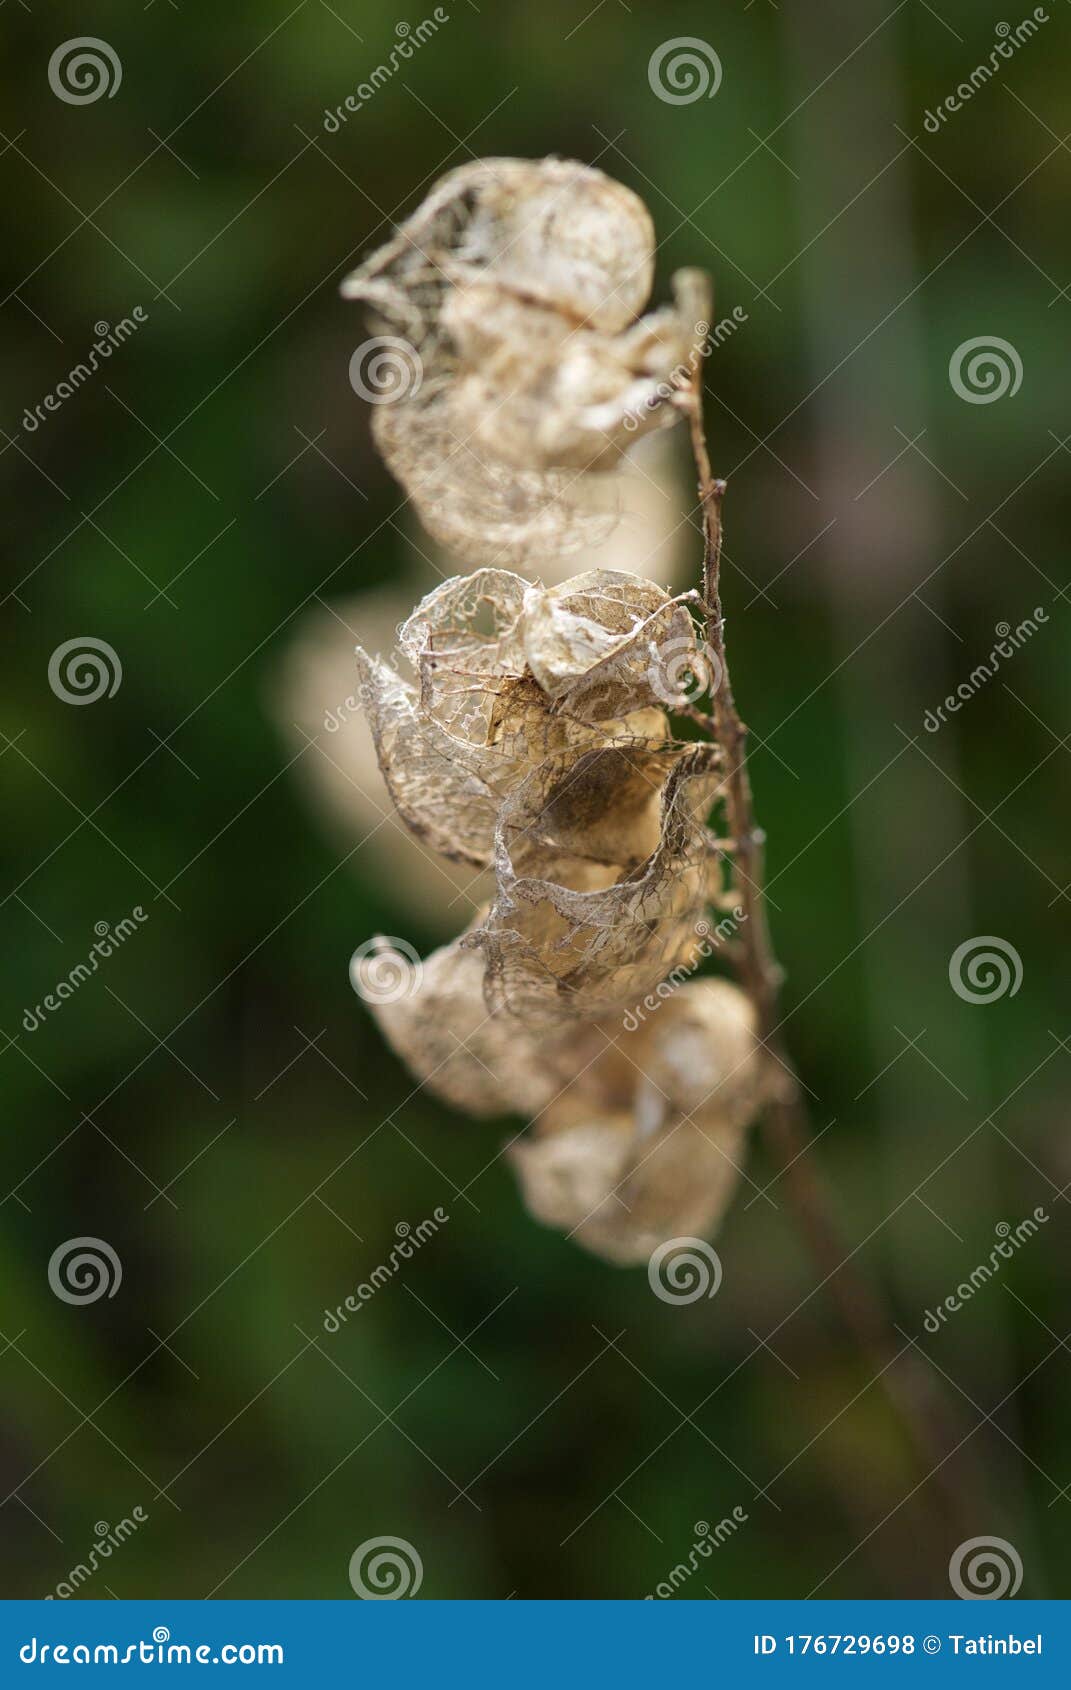 dried seeds of field pennycress, thlaspi arvense on greenbackground